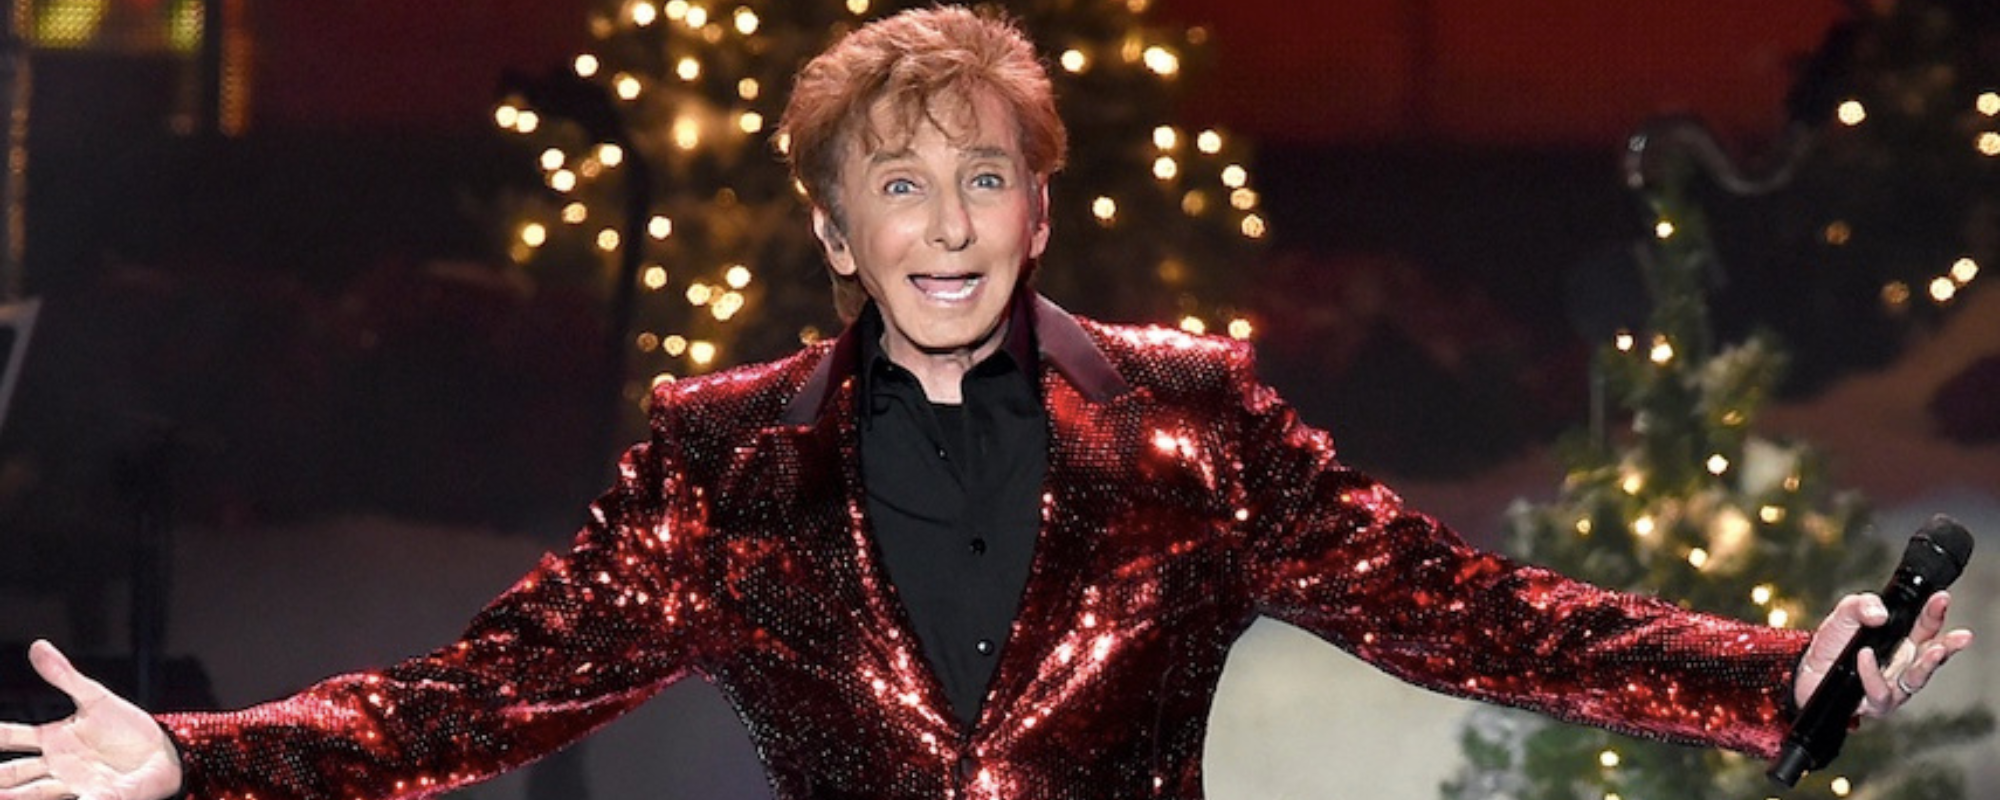 Cher and Barry Manilow Among Stars Joining Kelly Clarkson on NBC’s ‘Christmas in Rockefeller Center’ Special